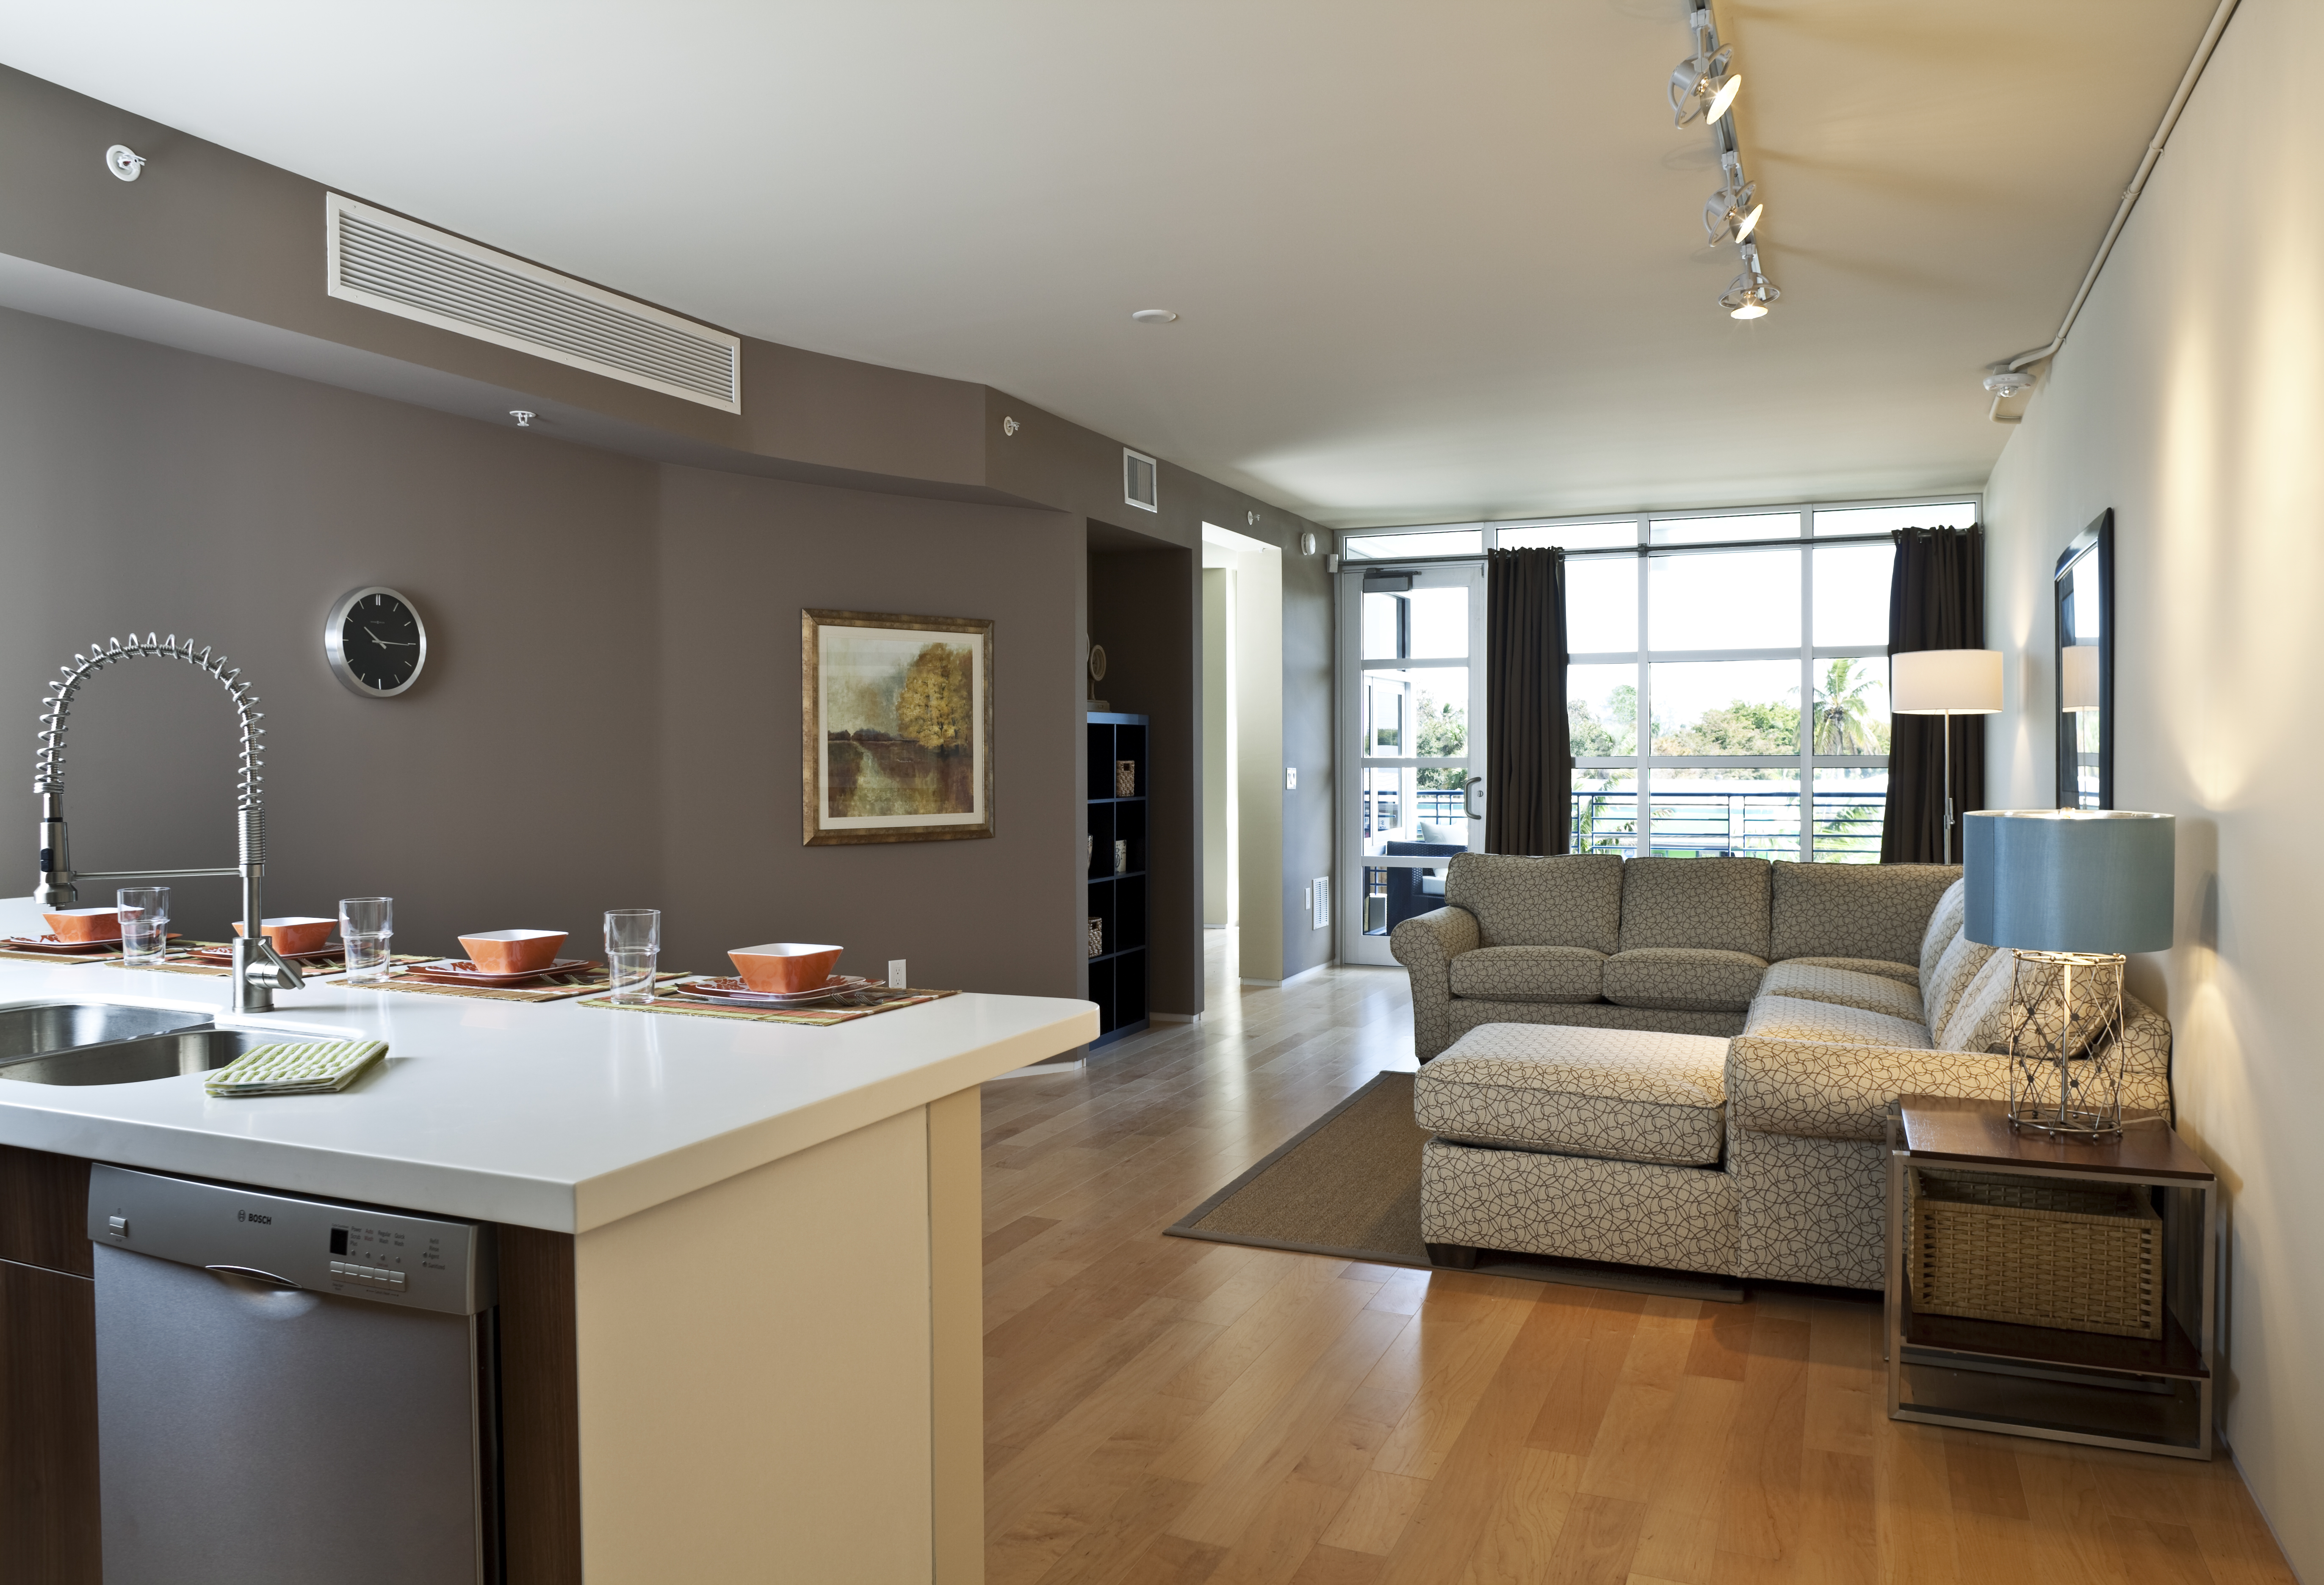 A modern kitchen and living room view from inside a Naples condominium